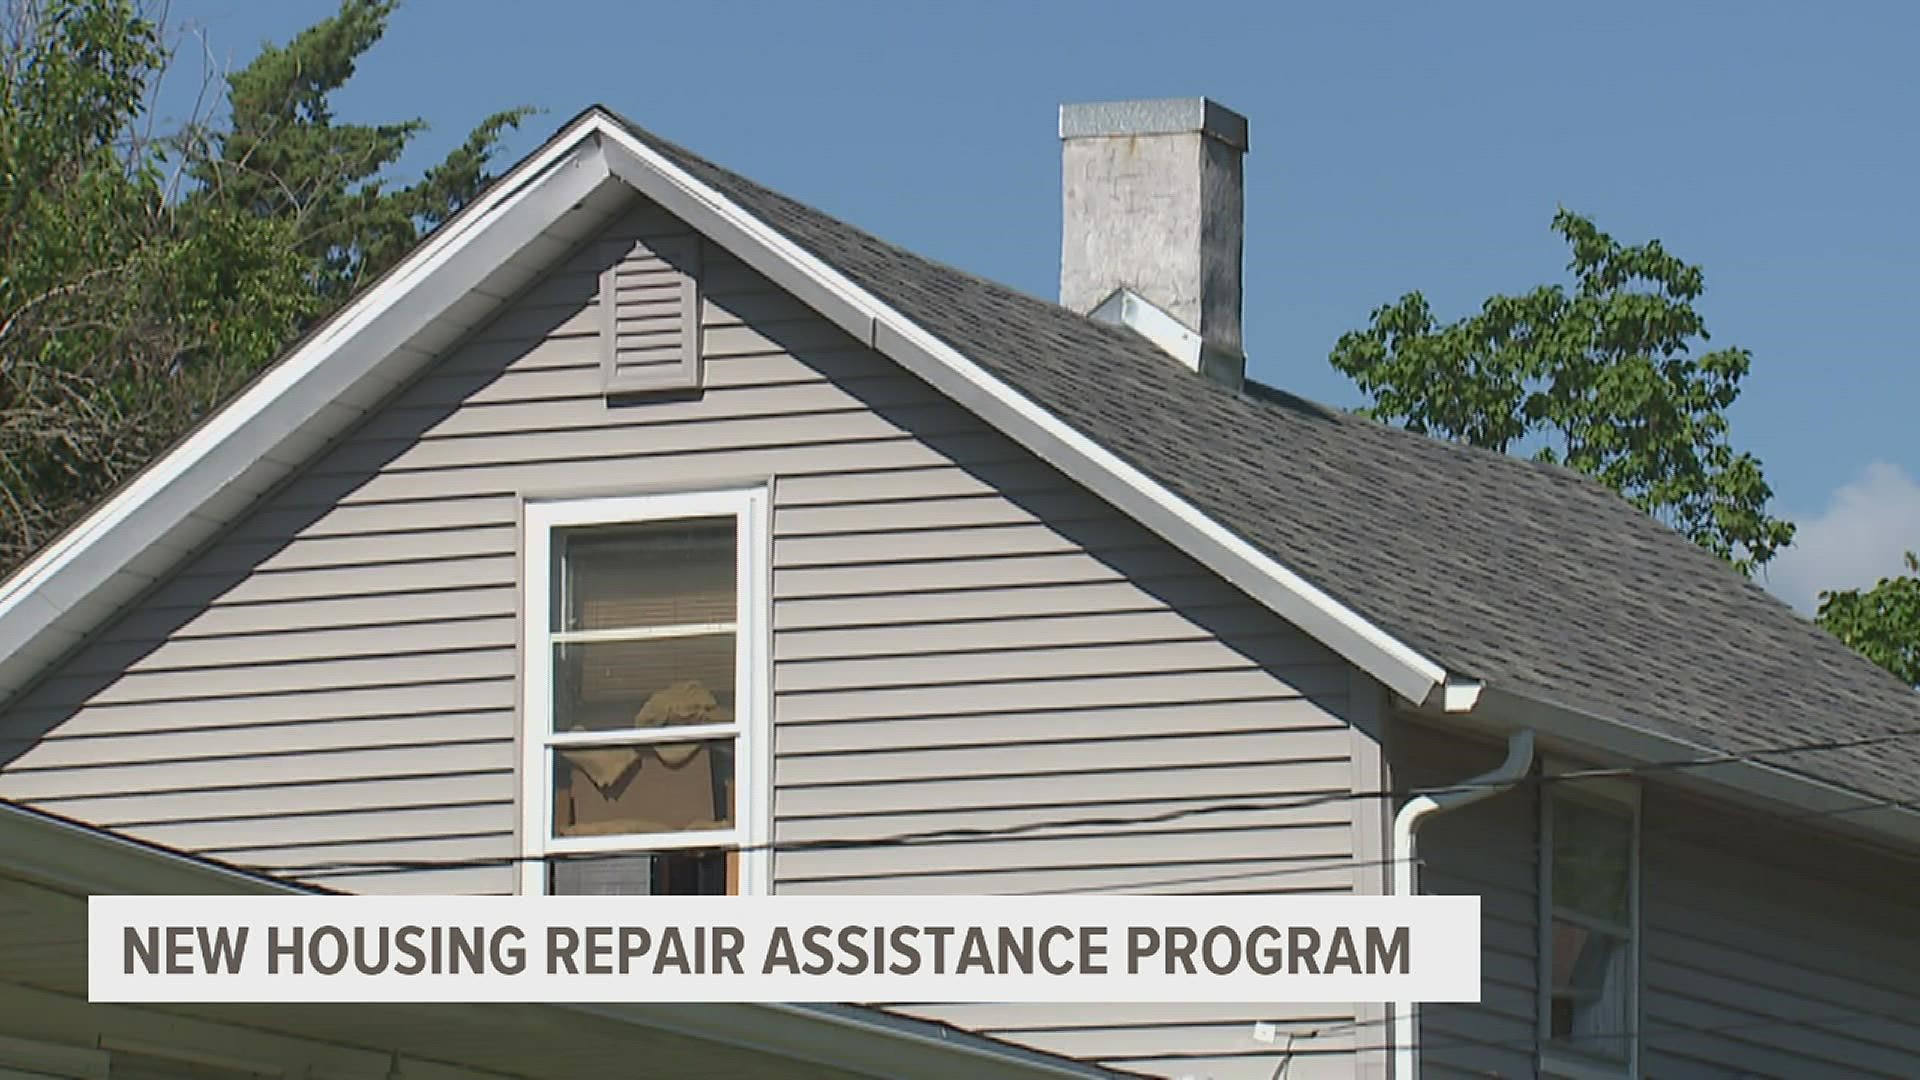 Low-income homeowners in Galesburg could be eligible for housing repair grants up to $4,500 through a city program.